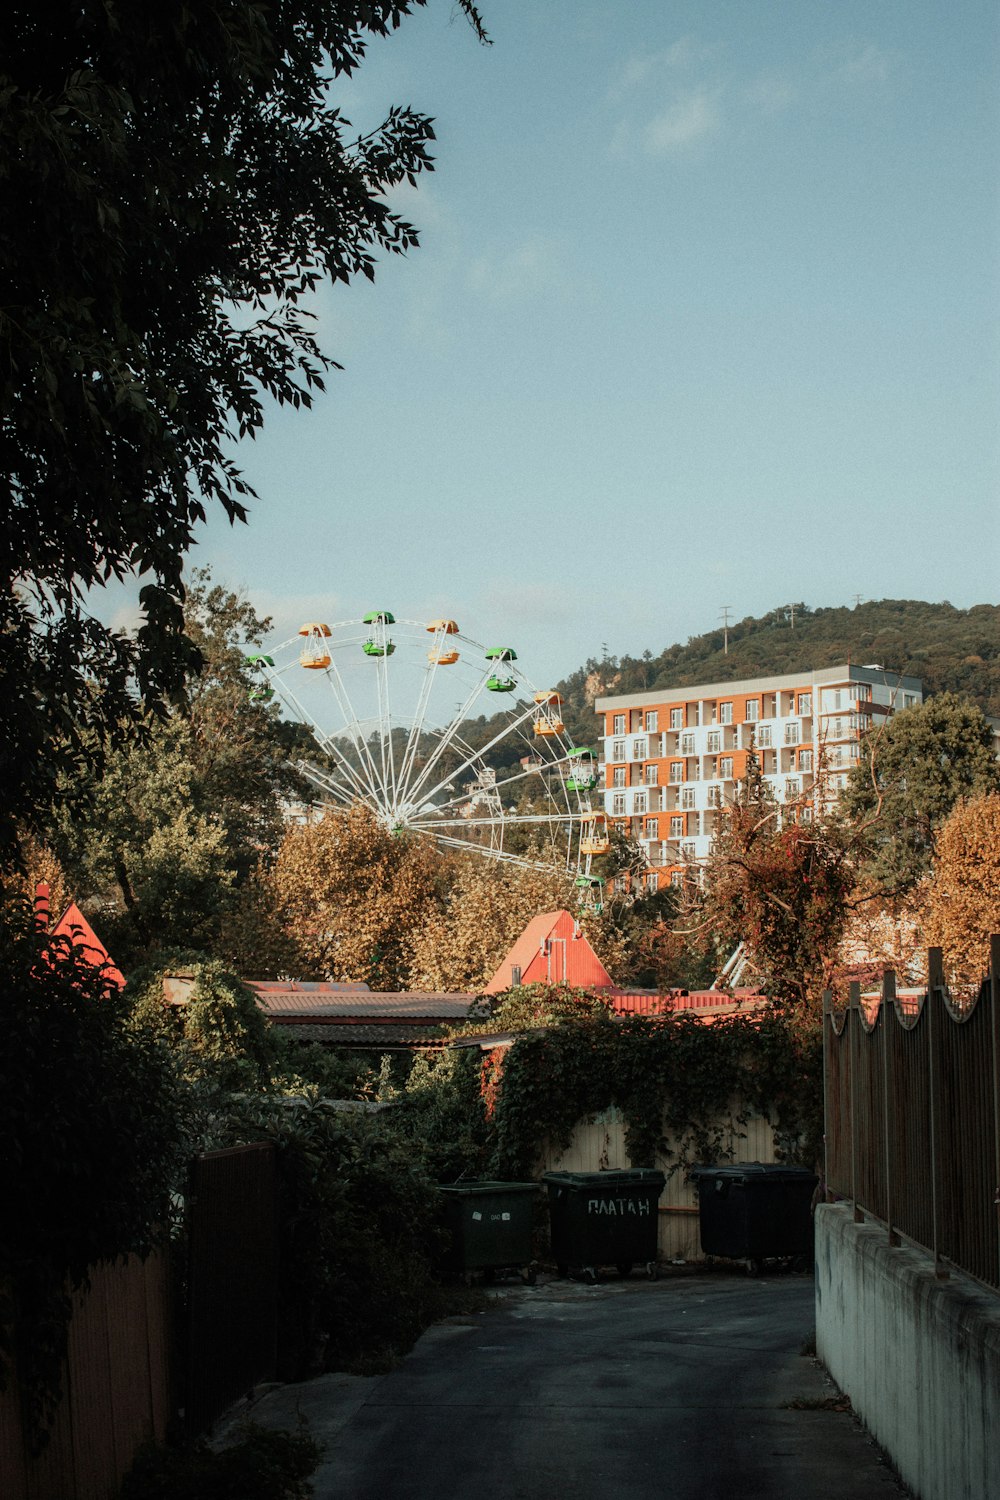 a view of an amusement park from a distance